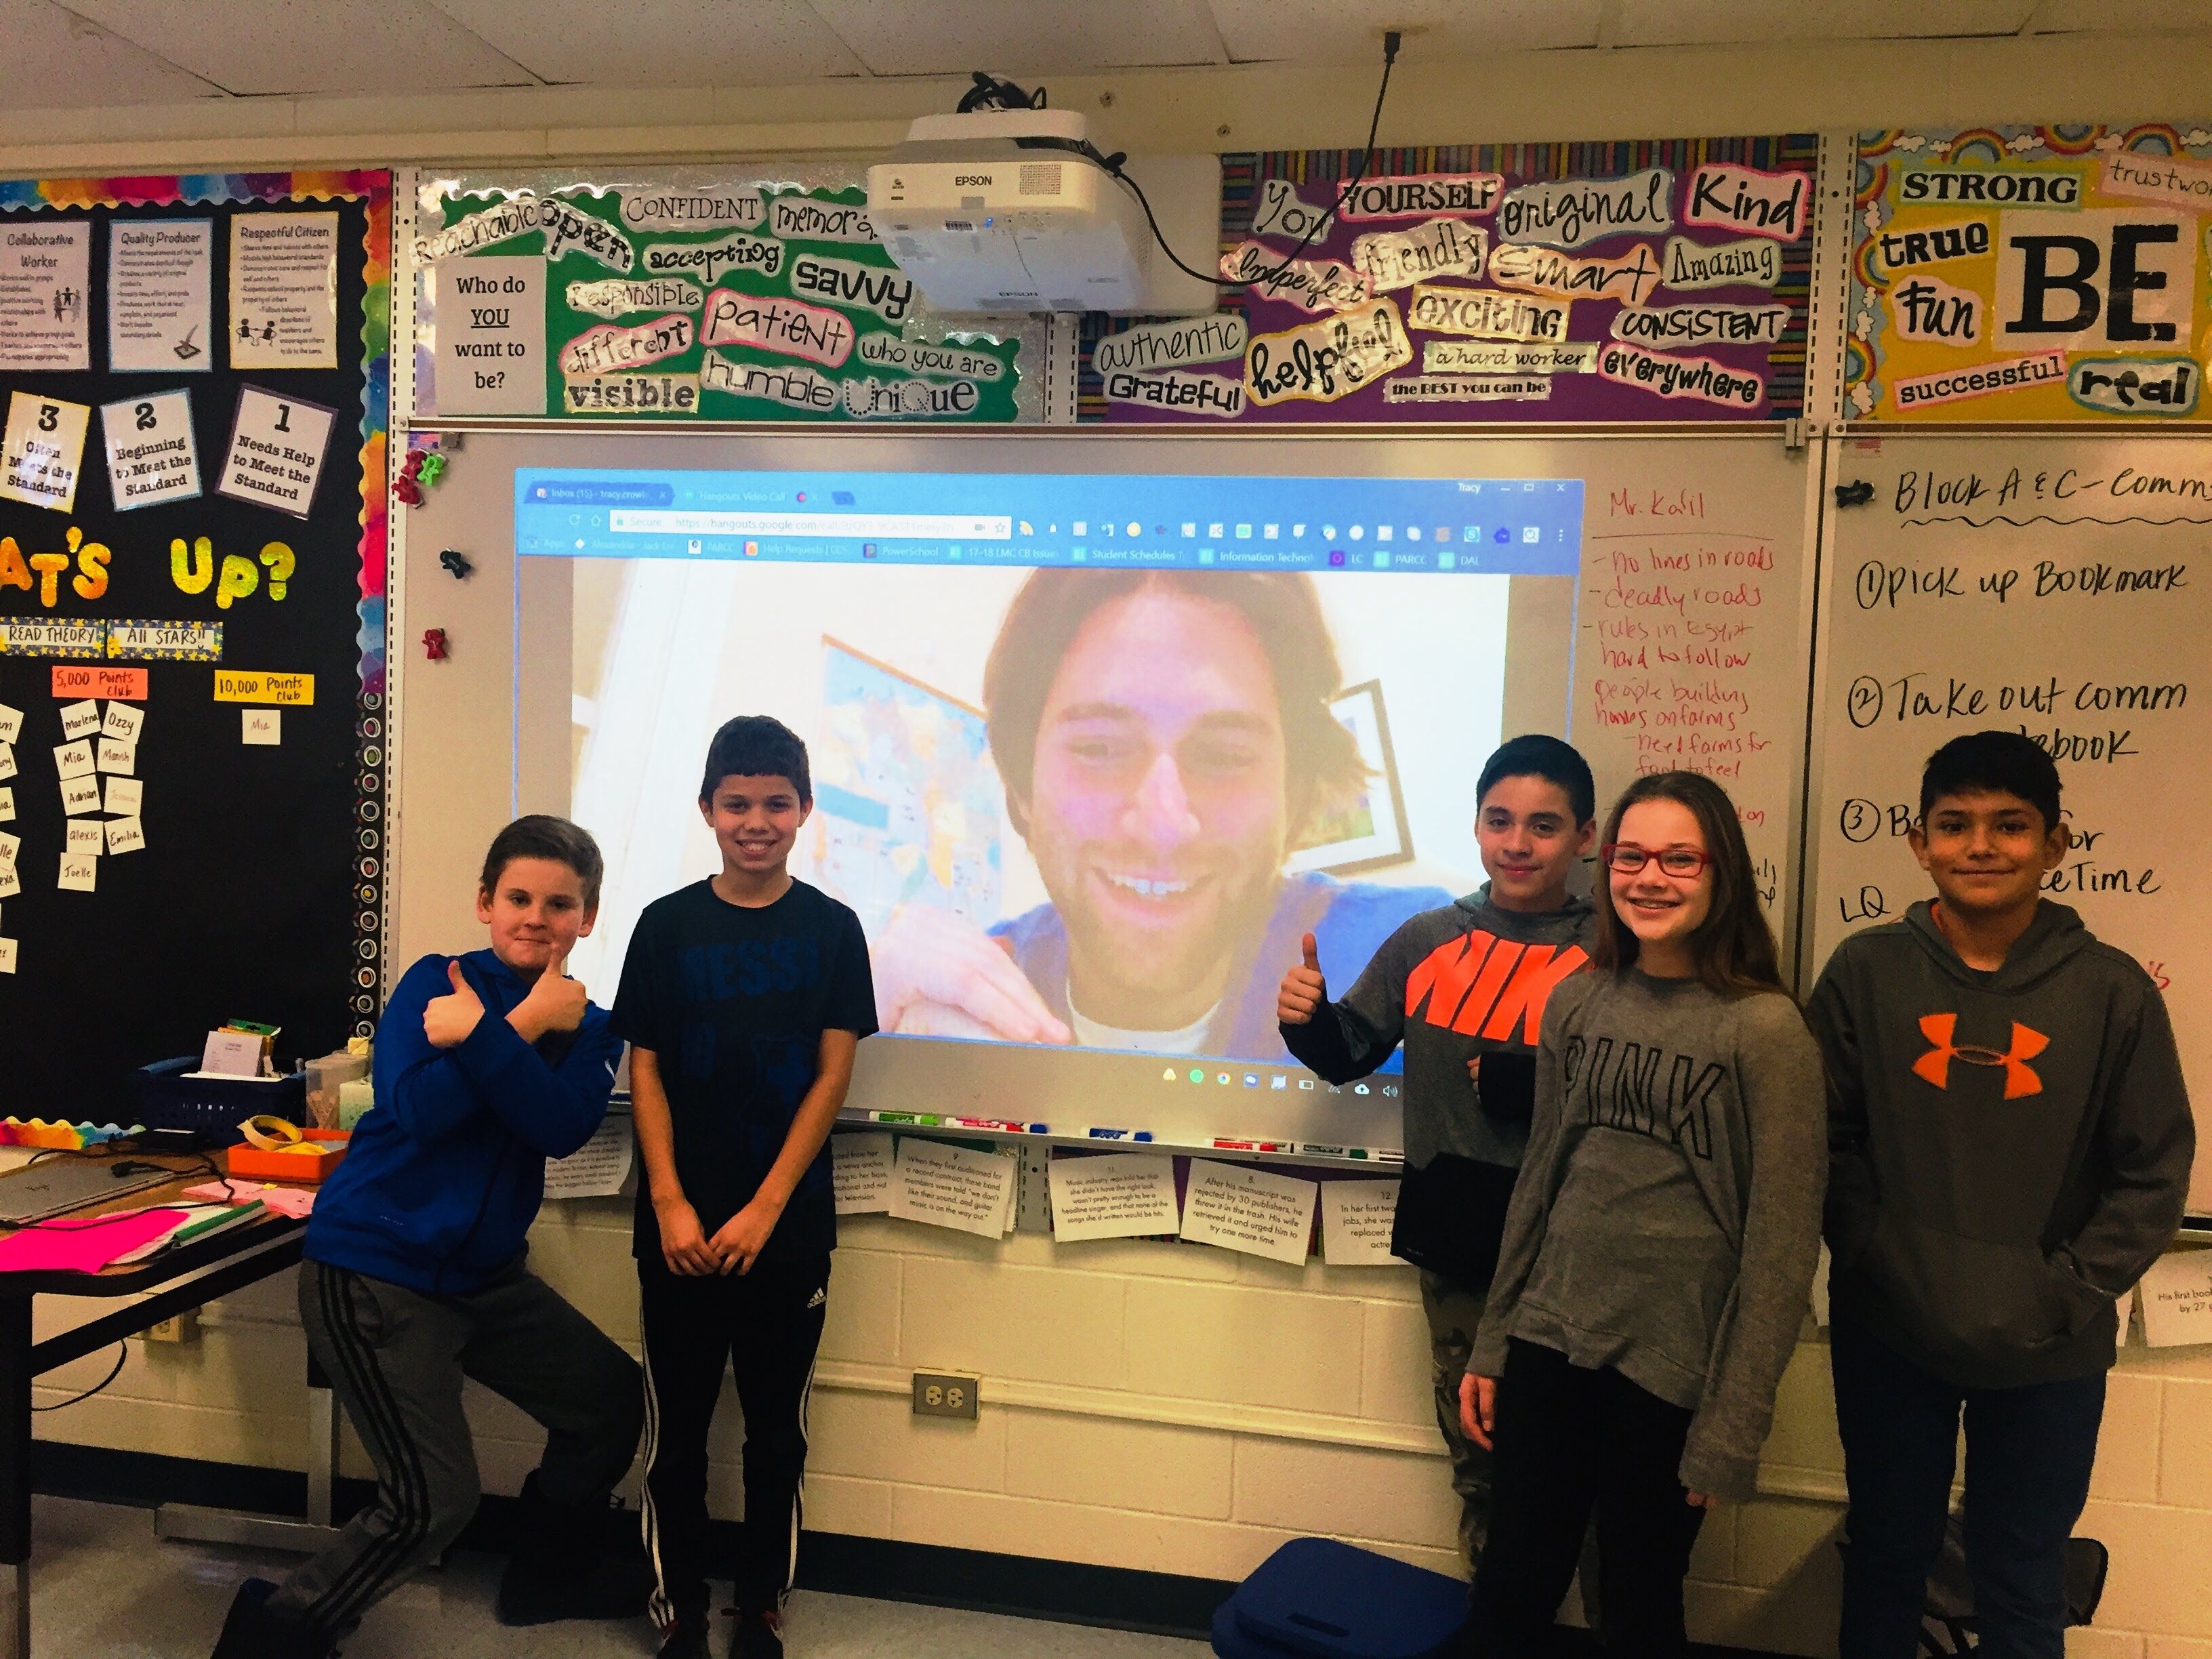 Jahd Khalil dials in from Egypt to speak with Jack London Middle School 6th graders. Image courtesy of Tracy Crowley. United States, 2018.